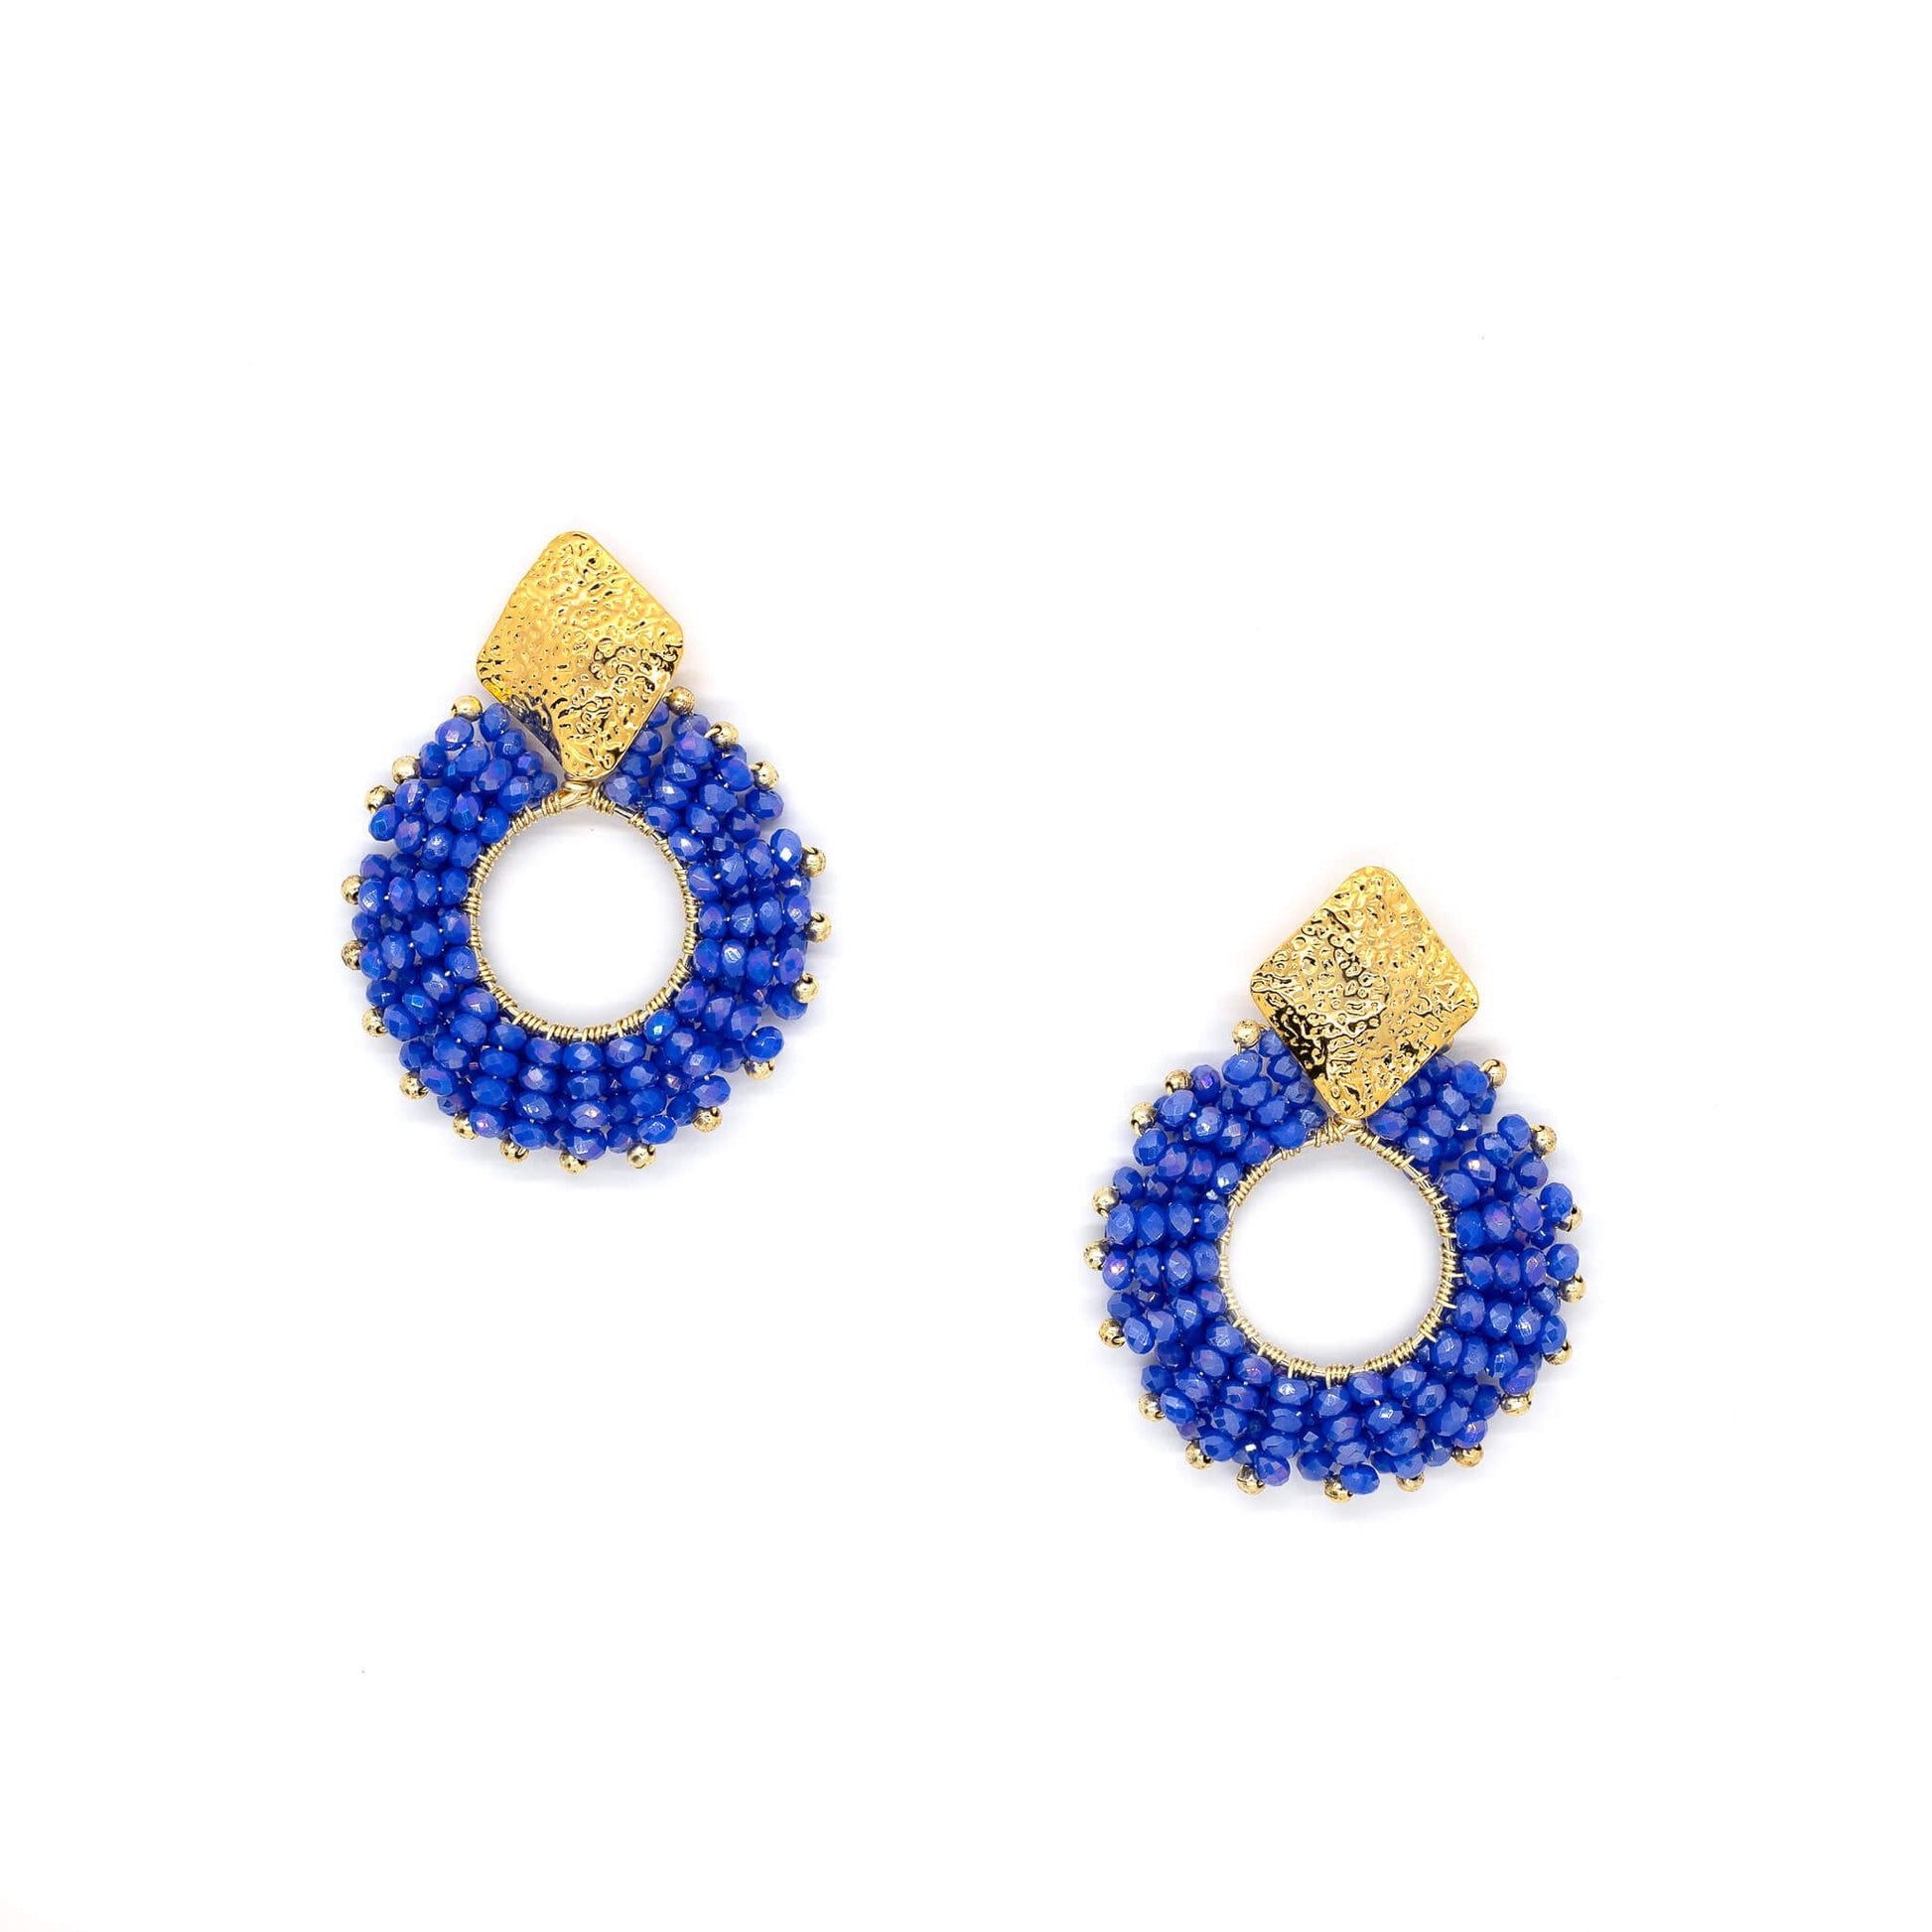 The Evry stud Earrings are 2 inches long. Gold and Blue Earrings. Lightweight and comfortable simple earrings. Handmade for women. Gold beaded earrings